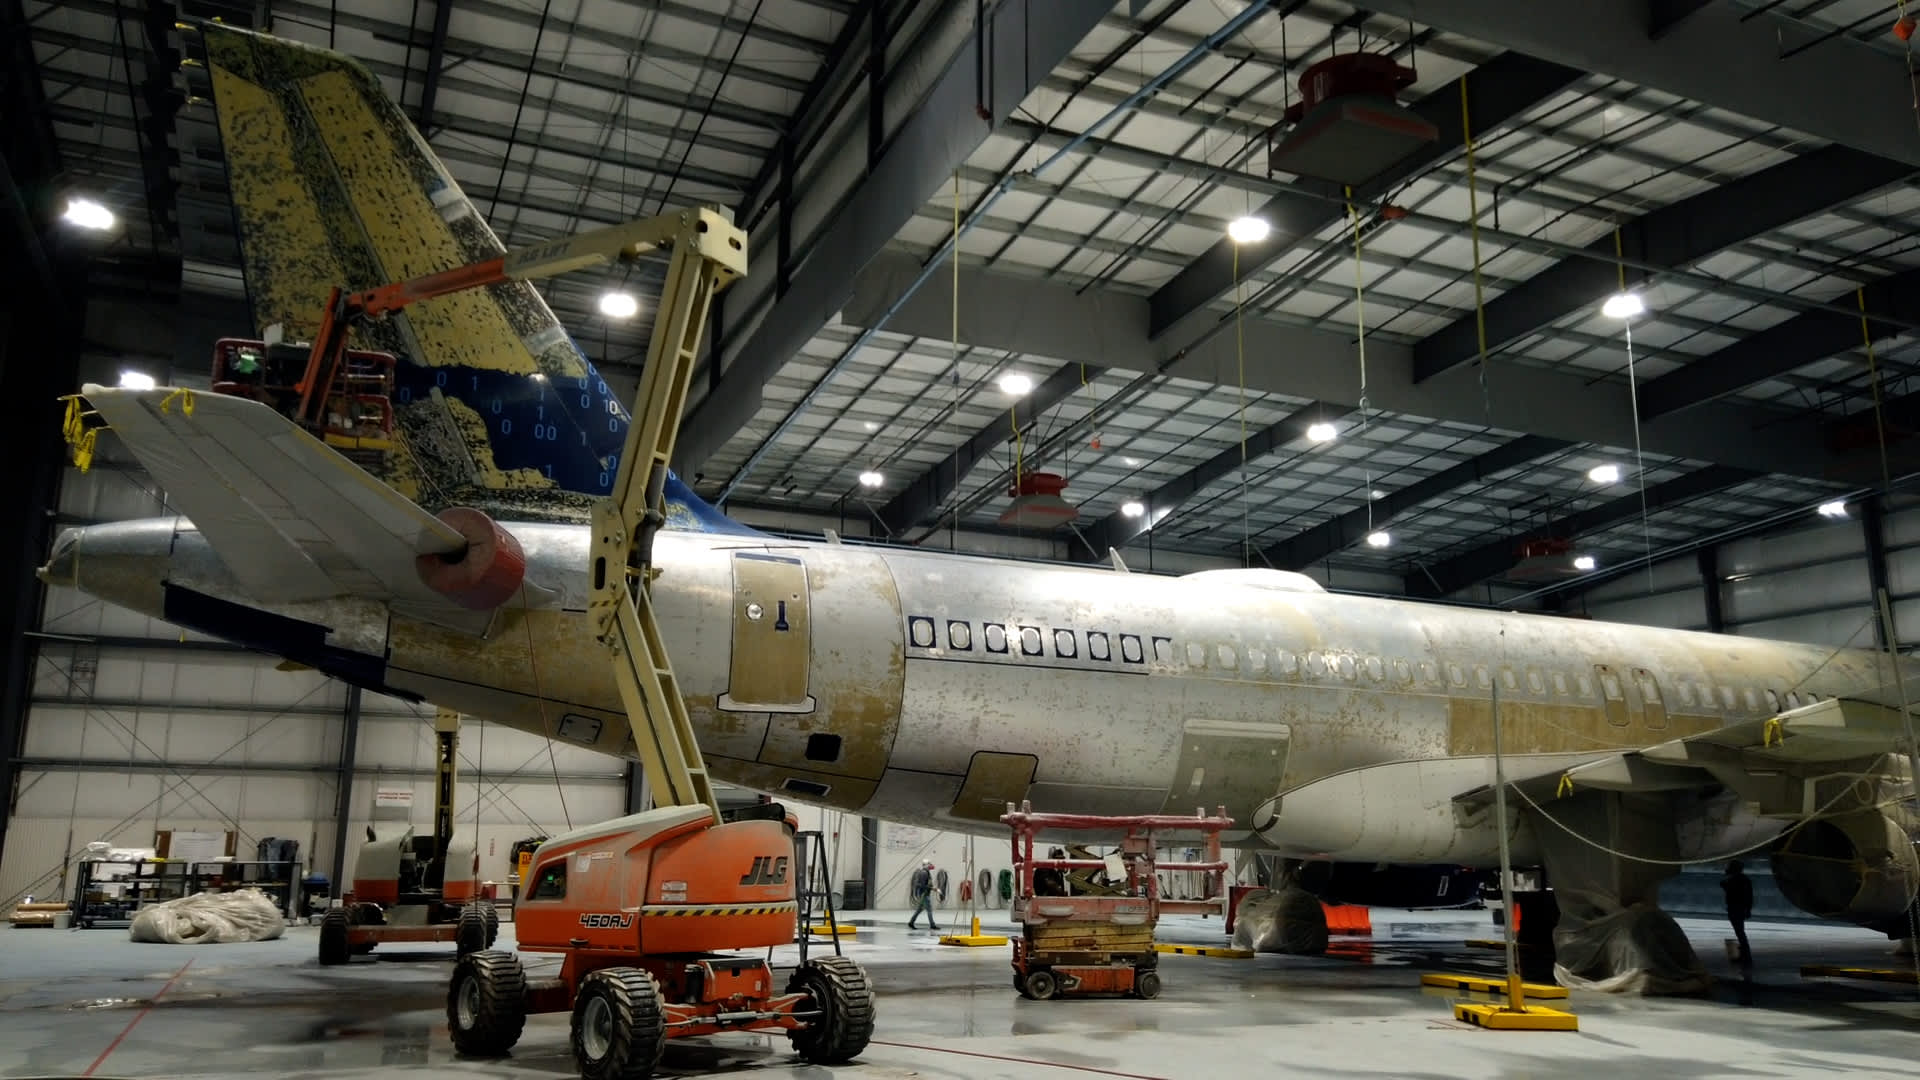 It costs over 0,000 to paint a plane — here’s a look into the  billion aircraft paint industry